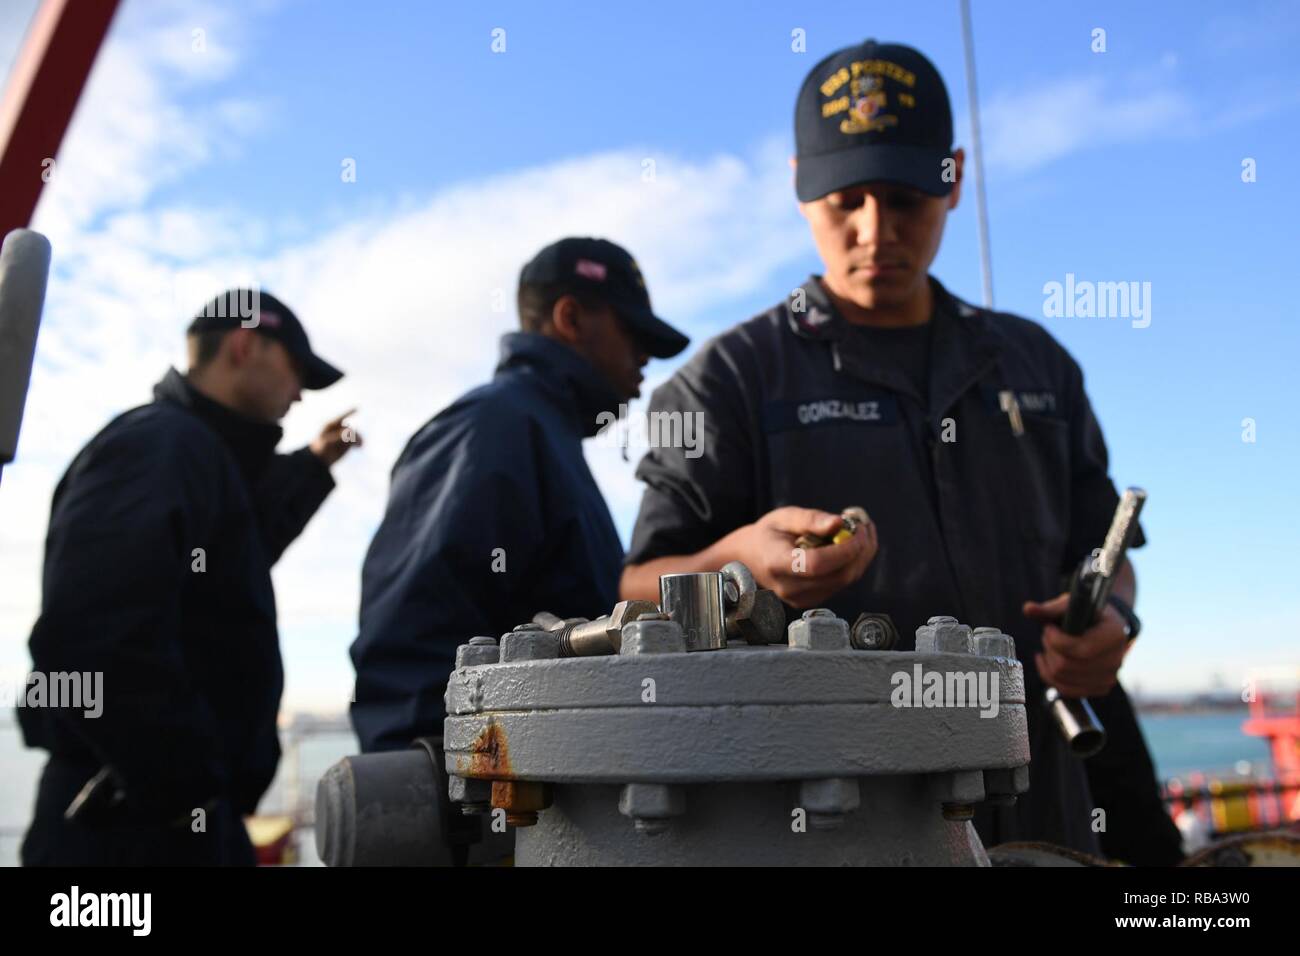 - VALENCIA, Spain (Dec. 20, 2016) Petty Officer 3rd Class Enrique Gonzalez, from San Bernardino, Calif., checks his tools aboard the guided-missile destroyer USS Porter (DDG 78) as the ship prepares to take on fuel pier-side in Valencia, Spain, Dec. 20, 2016. Porter, forward-deployed to Rota, Spain, is conducting naval operations in the U.S. 6th Fleet area of operations in support of U.S. national security interests in Europe. Stock Photo